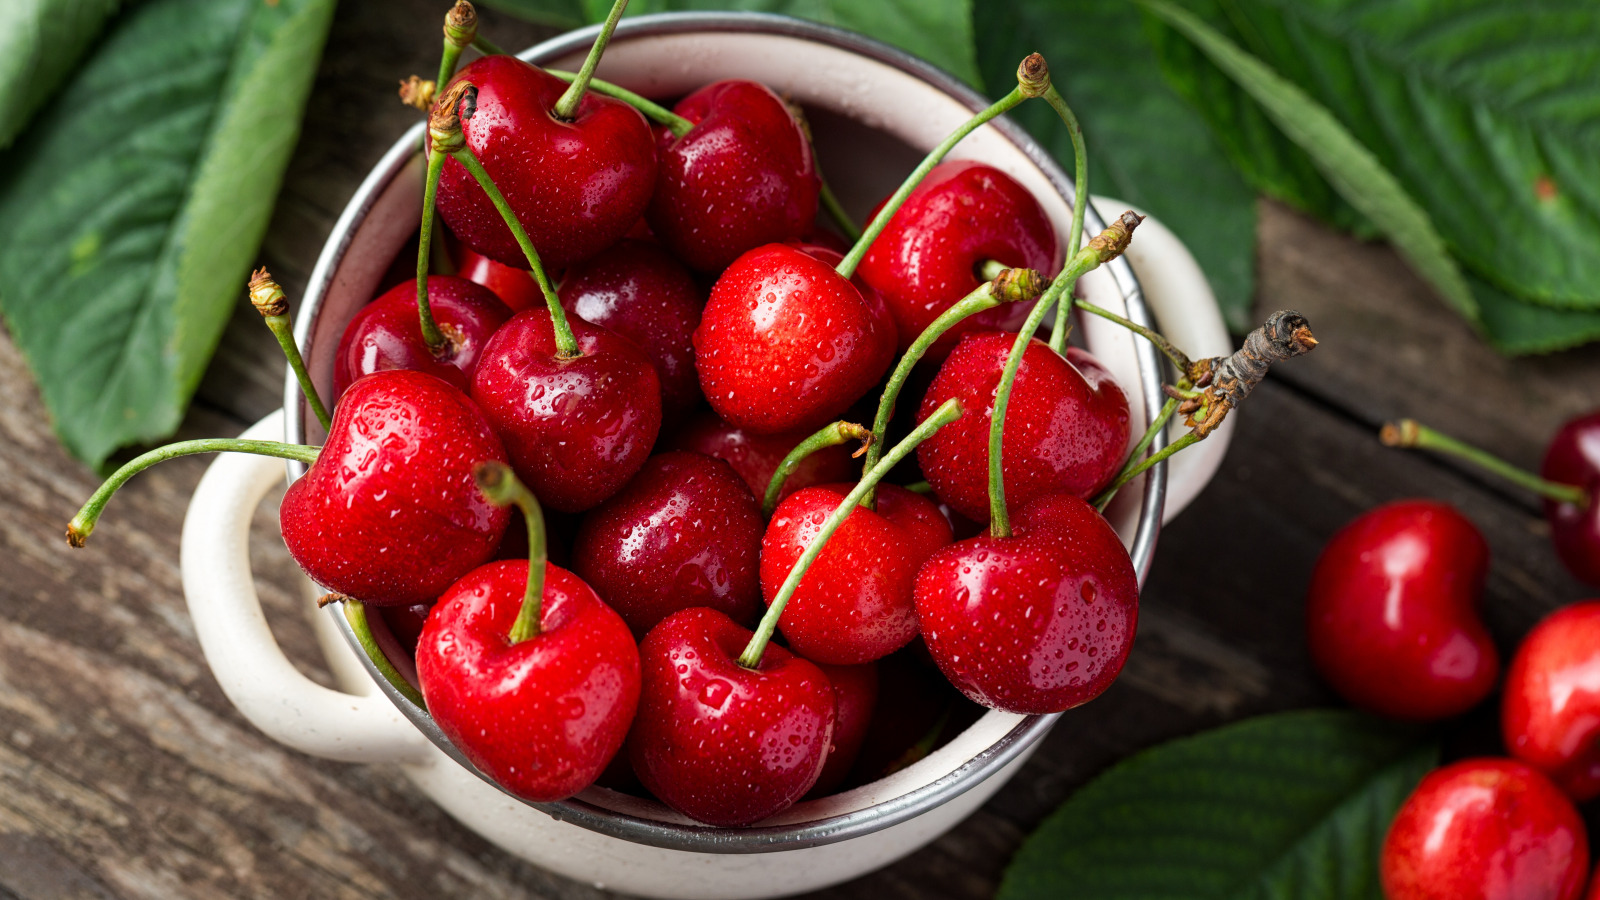 Cherry benefits for males